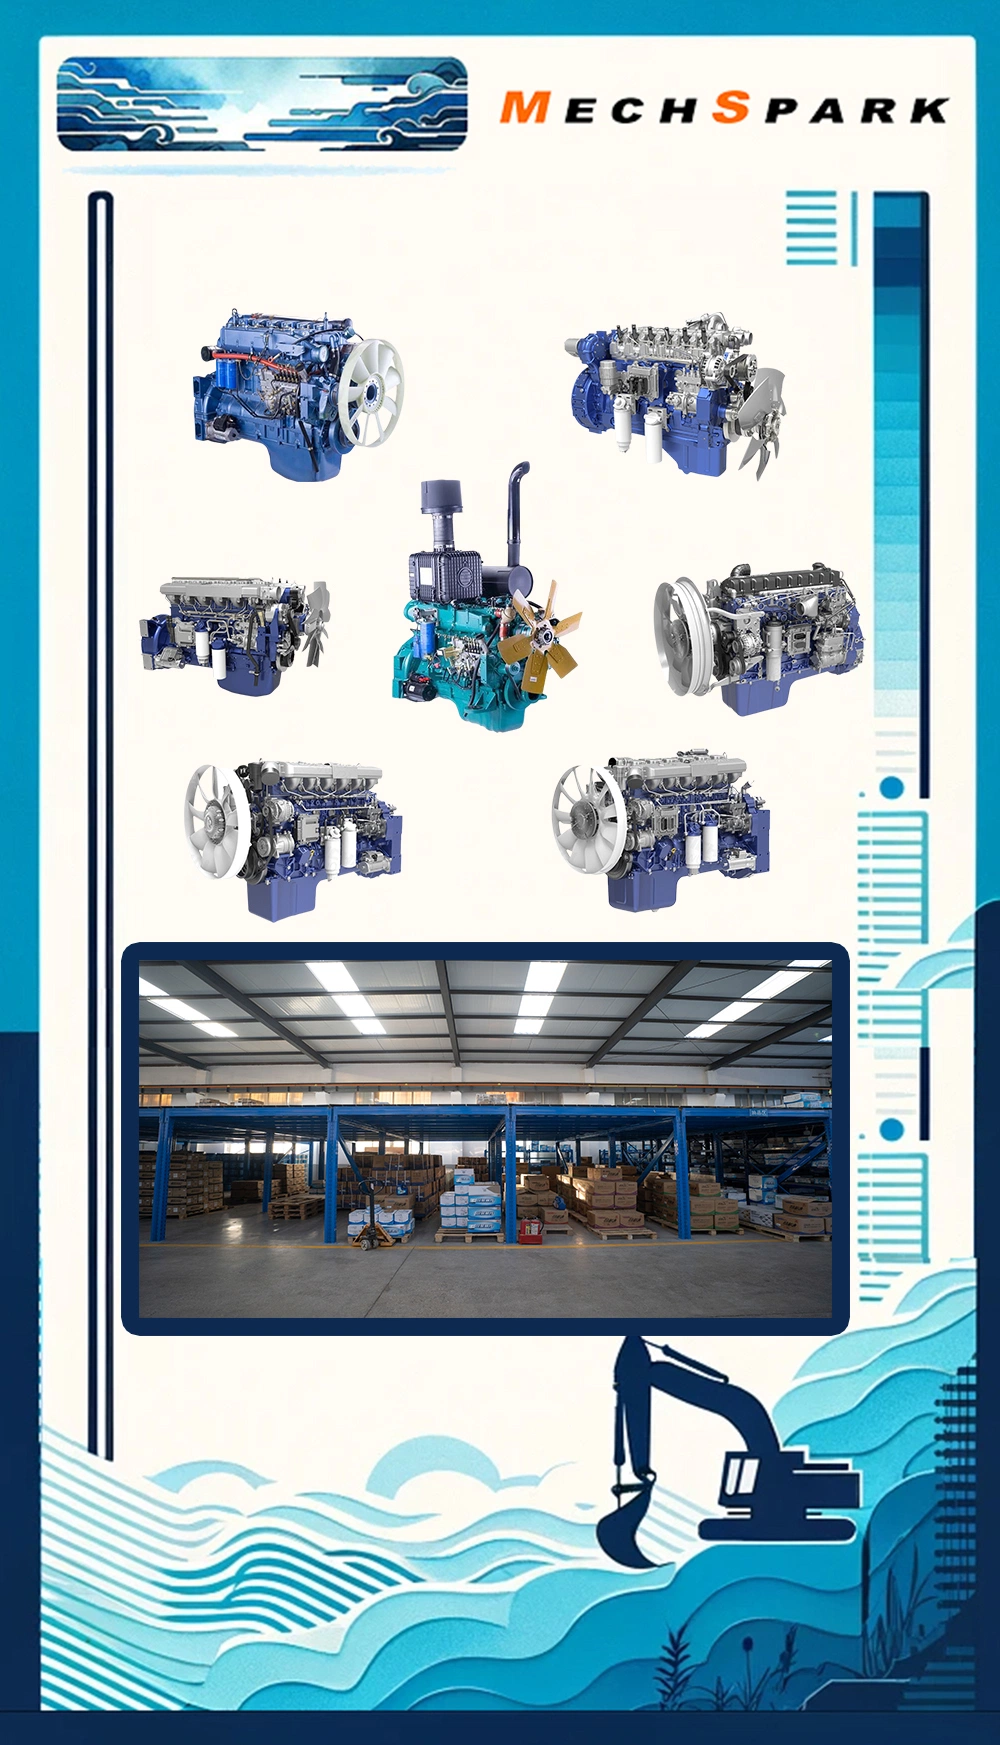 Wp6 Wechai Engine Parts for Sinotruk HOWO Trucks and Marine Engines, Including Generator and Diesel Engine Spare Parts